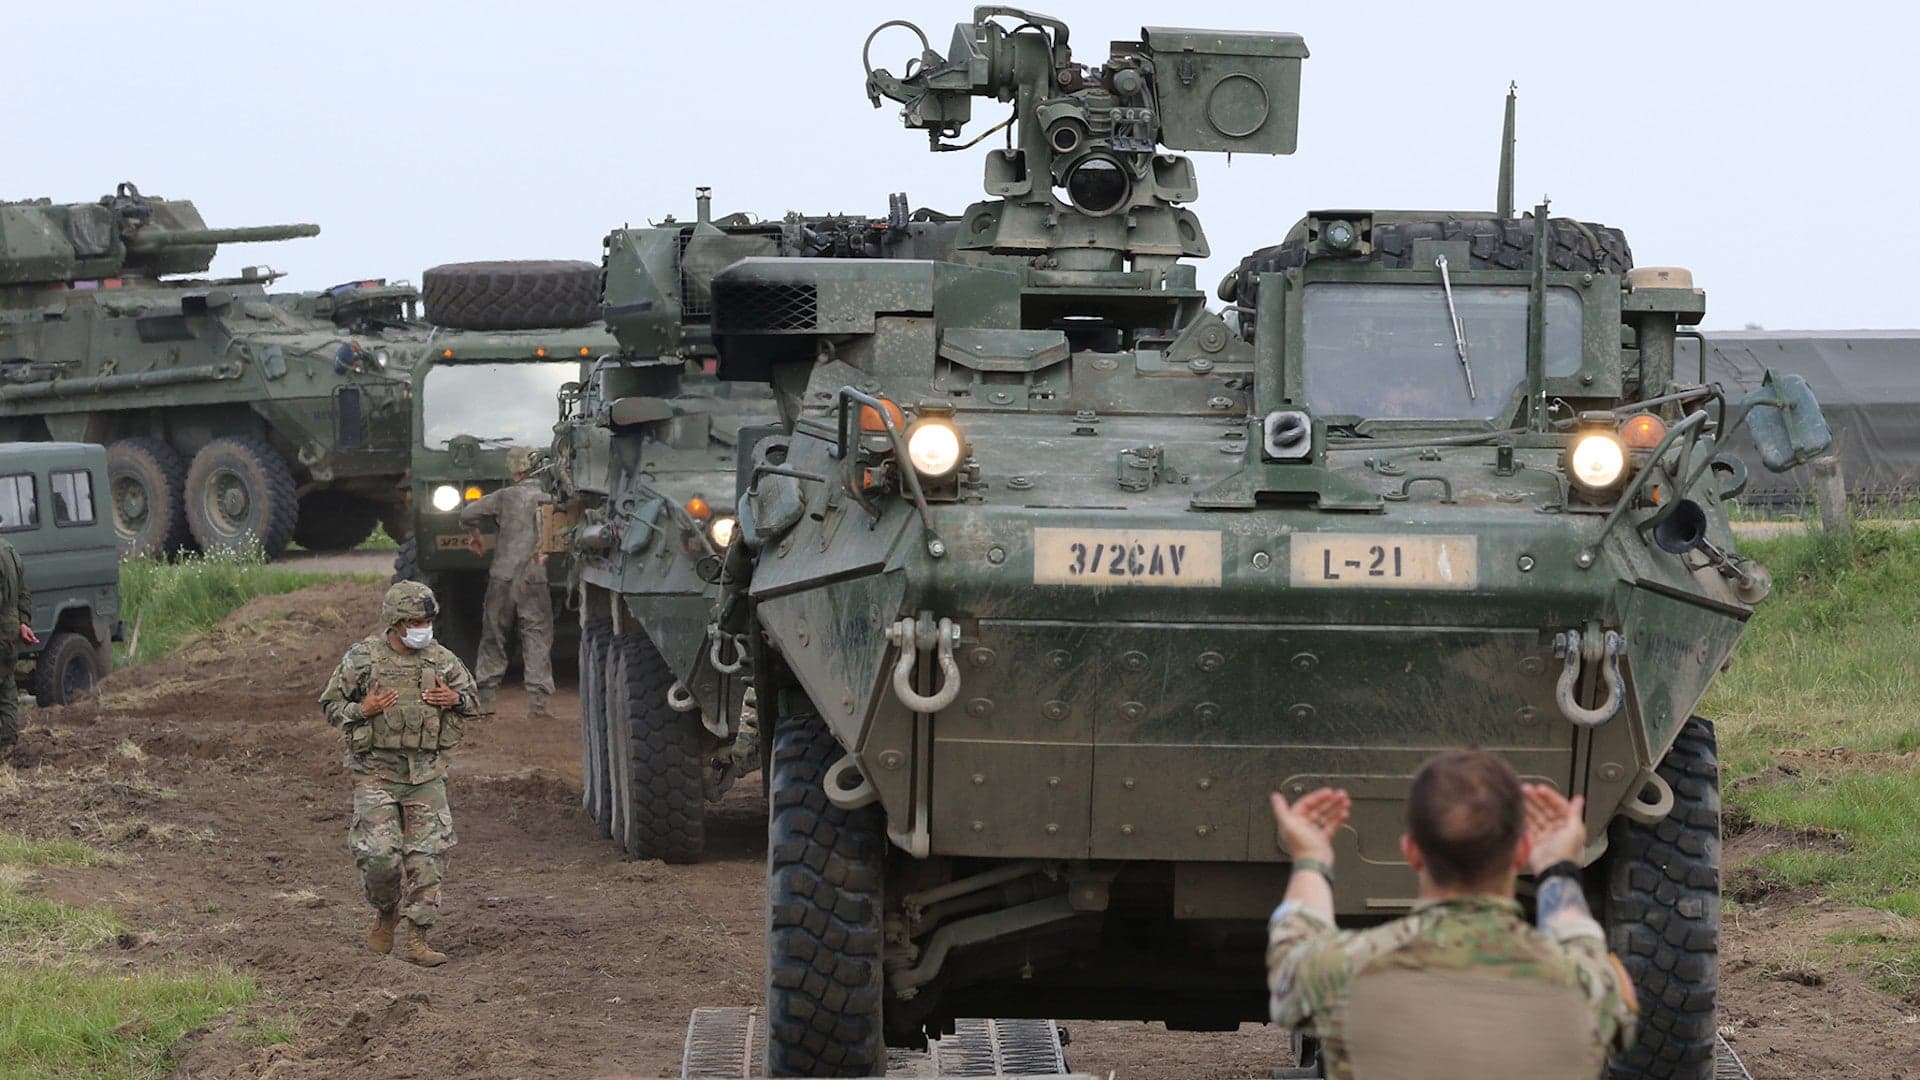 U.S. Army Armored Vehicles, Paratroopers Will Fan Out In Europe To Deter Putin